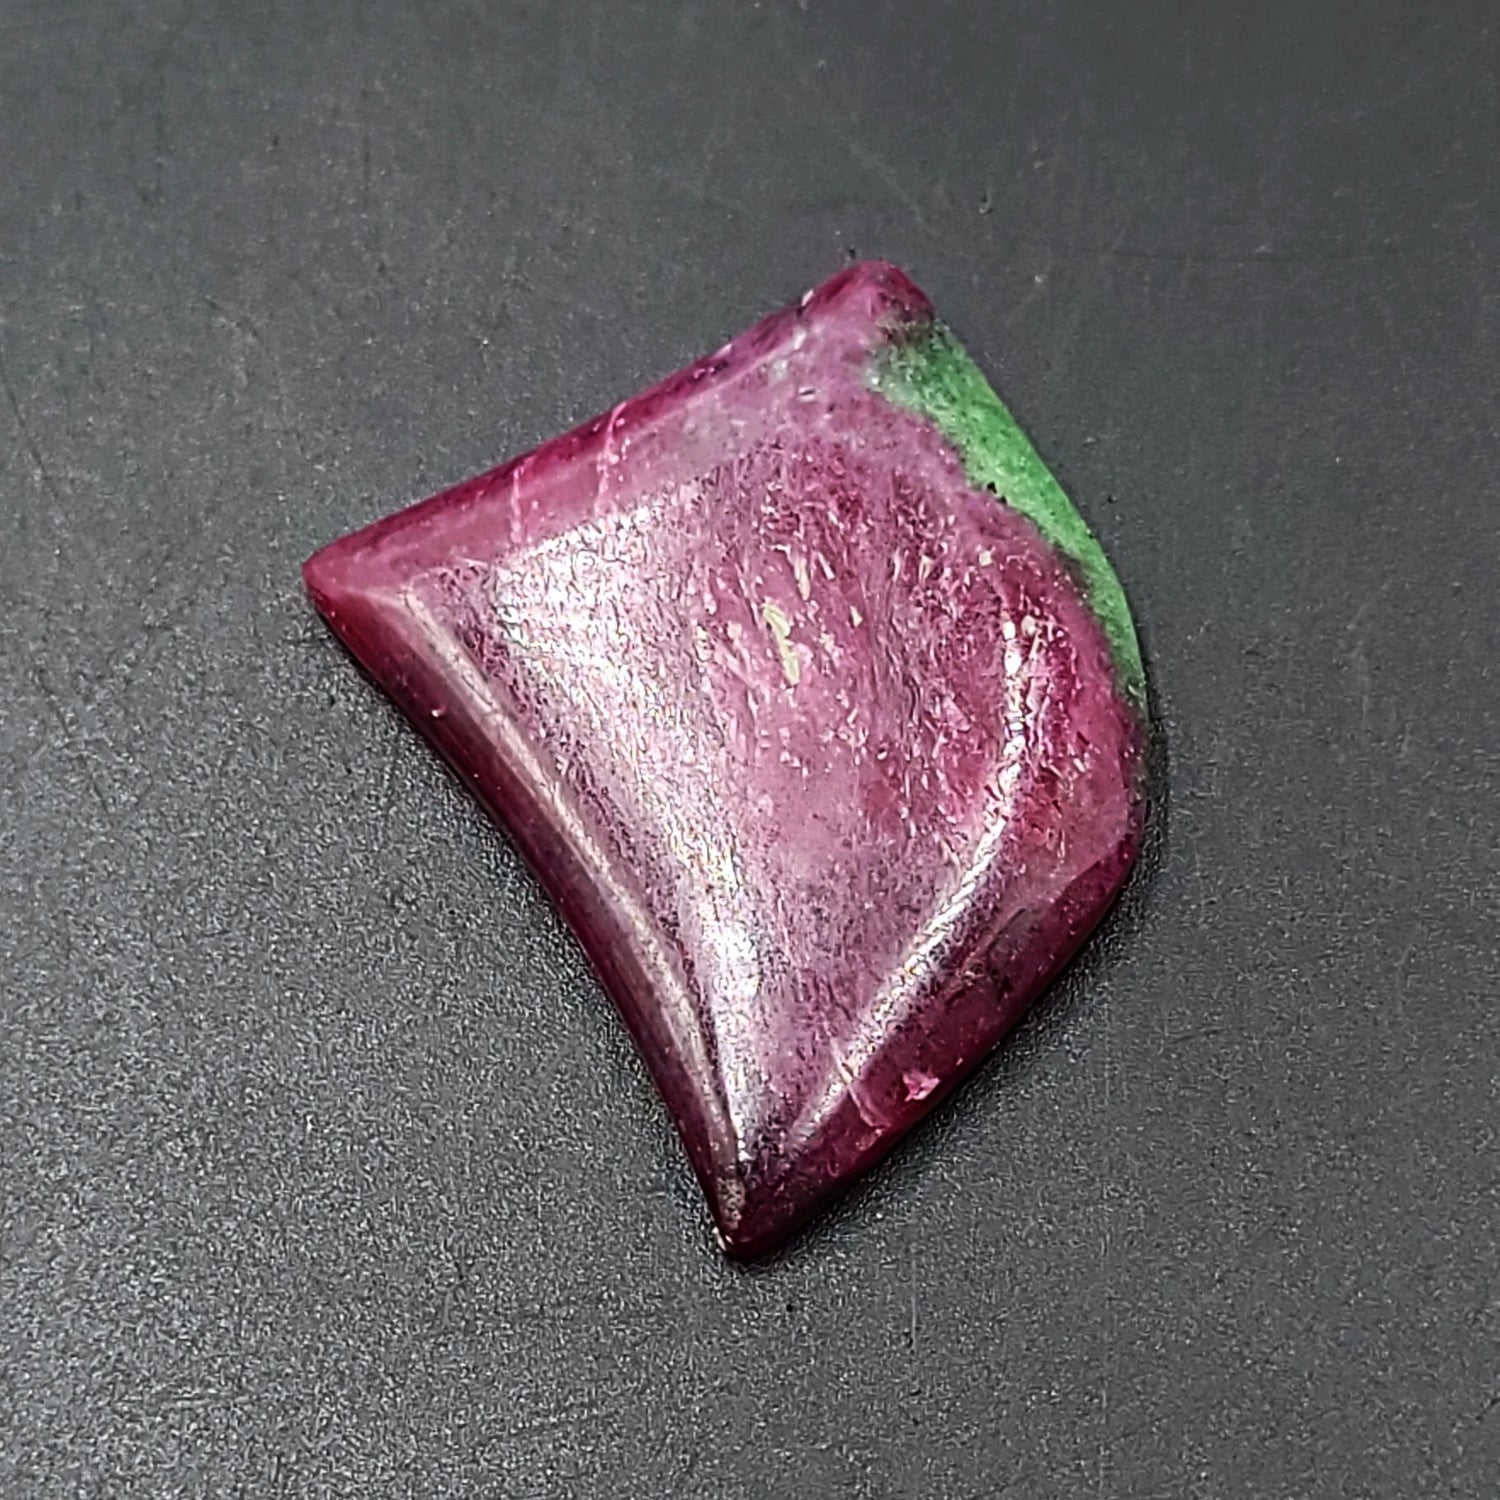 Ruby Zoisite Cabochon Free Form "Tooth" Polished Cut Stone - Elevated Metaphysical